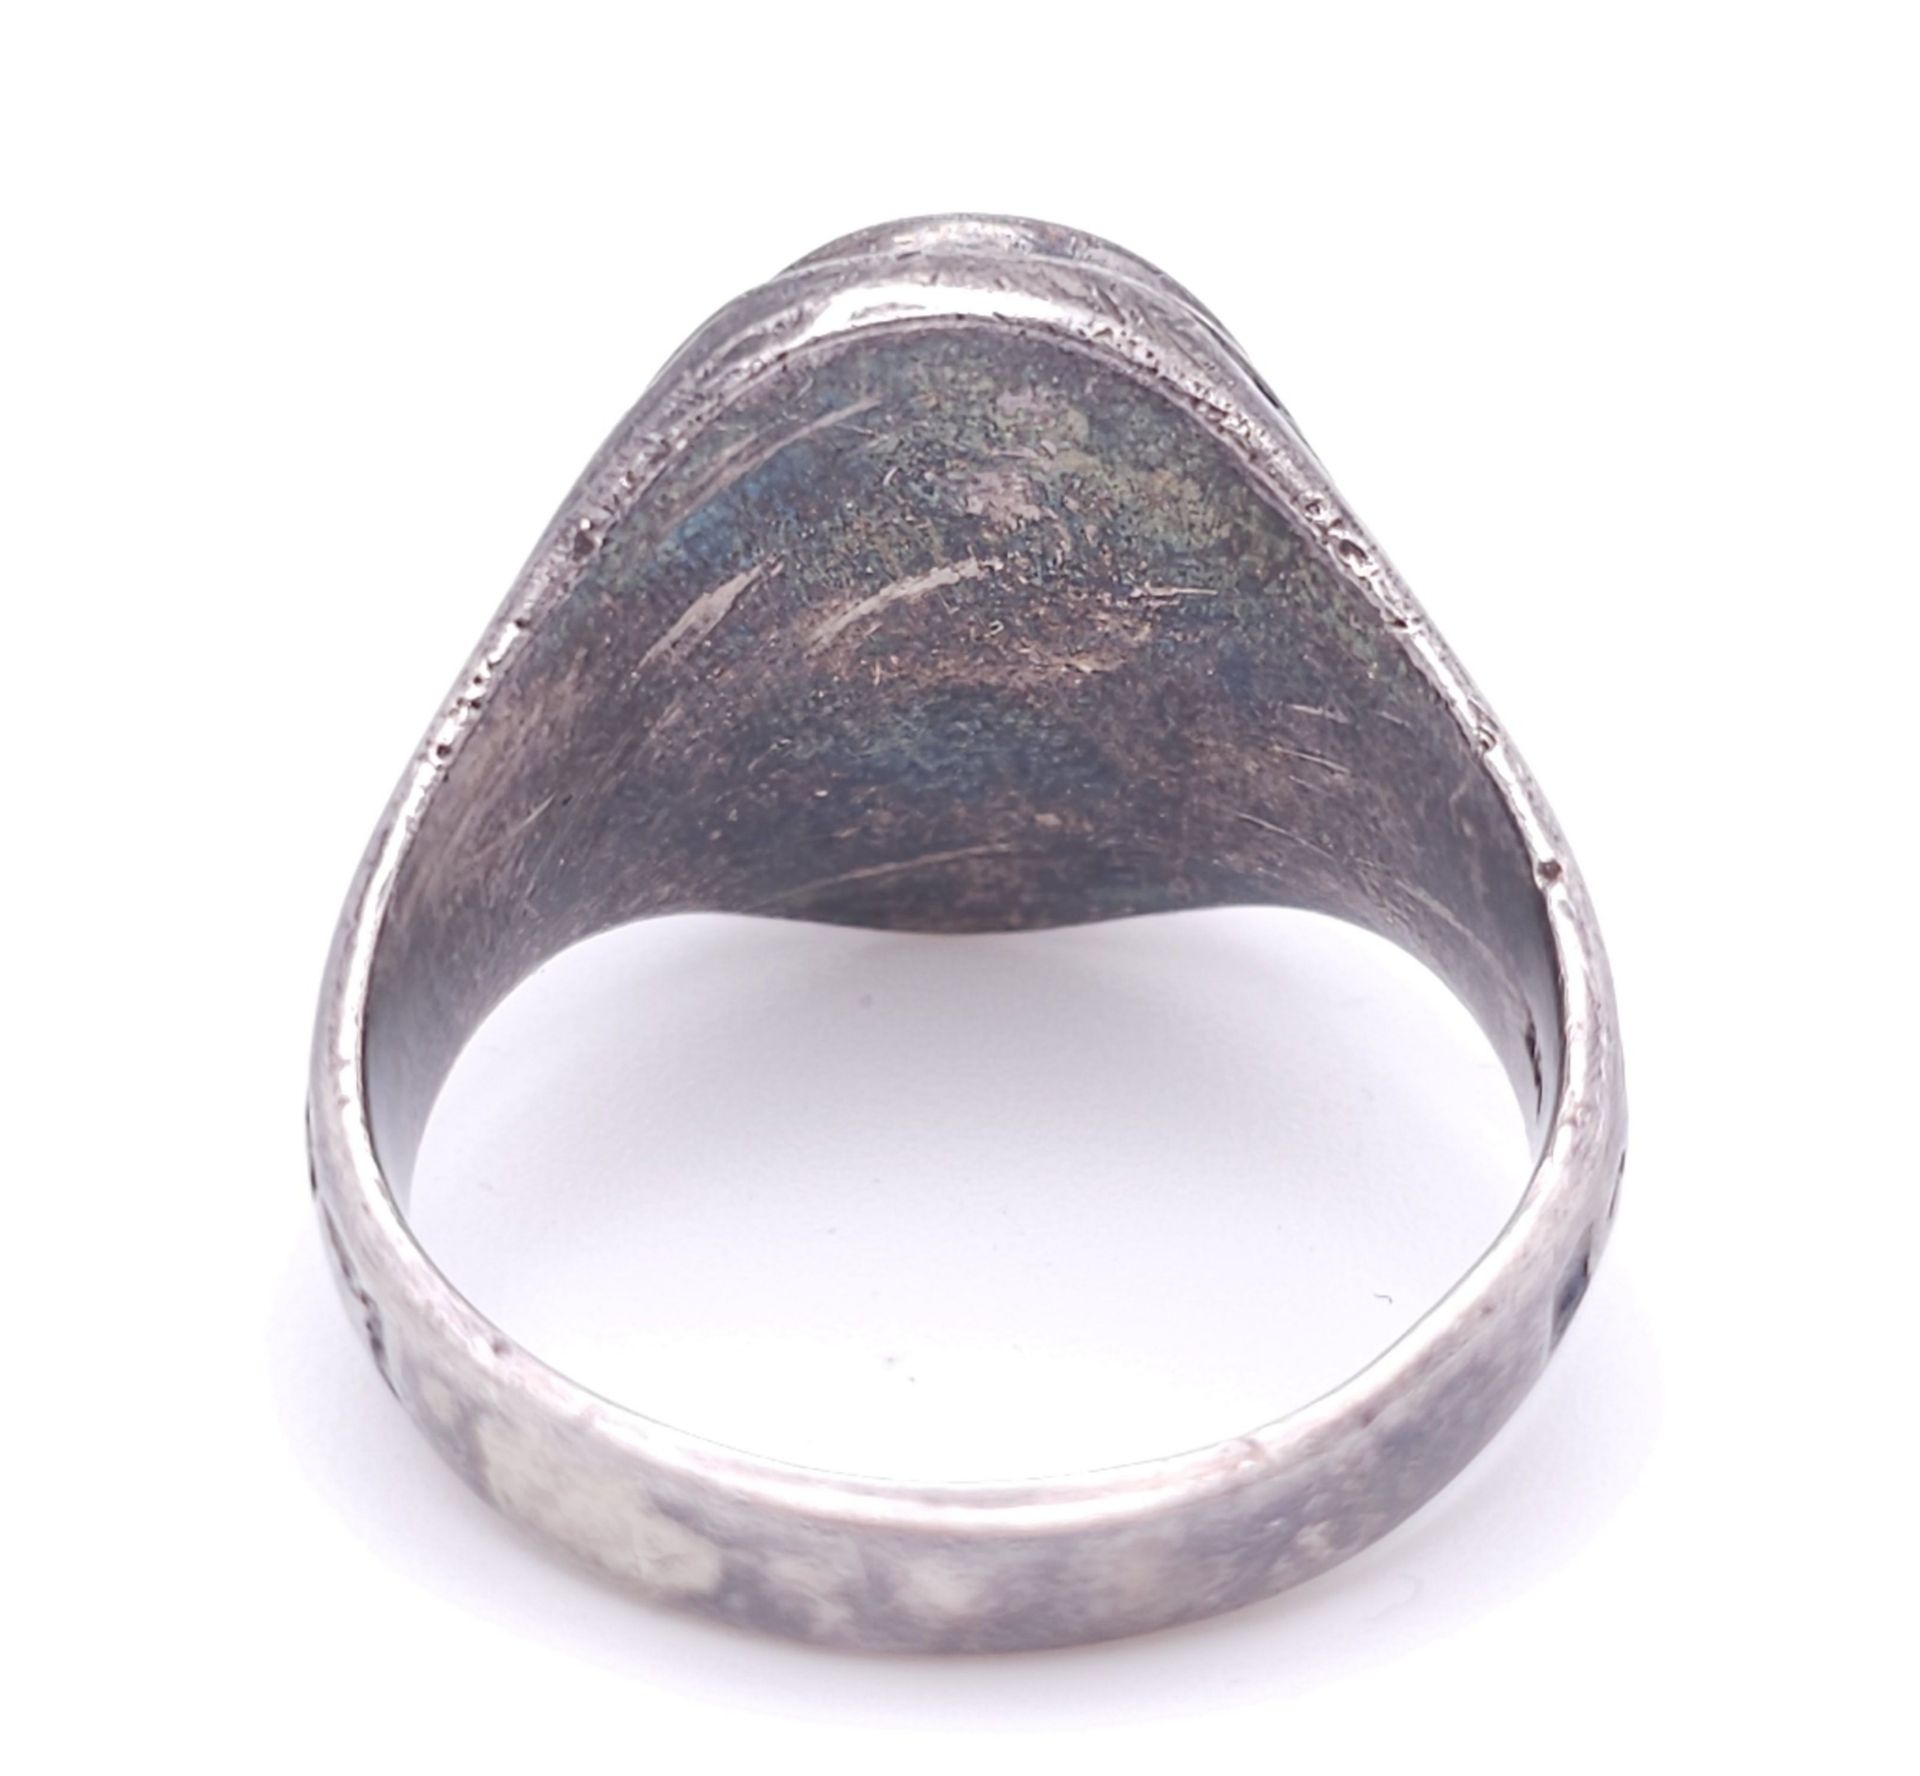 A vintage 925 silver Yin & Yang enamel ring with further decoration on shoulder. Total weight 12.4G. - Image 4 of 5